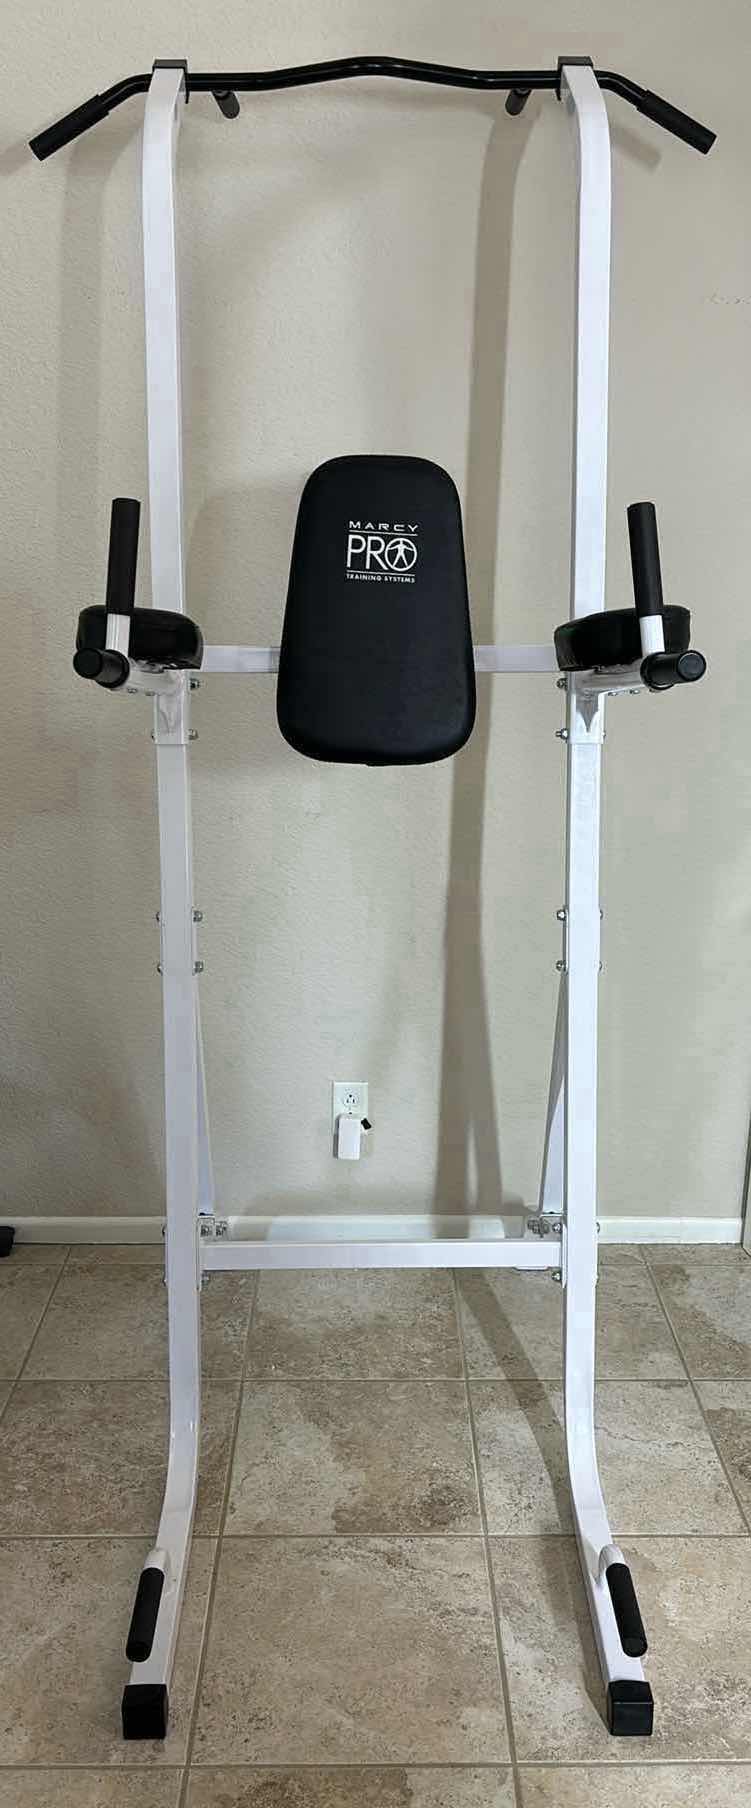 Photo 1 of MARCY PRO TRAINING SYSTEM “POWER TOWER” W DIP HANDLES, PULL UP BAR, 49"L x 41.30"W x 85.80"H (TC-4699)